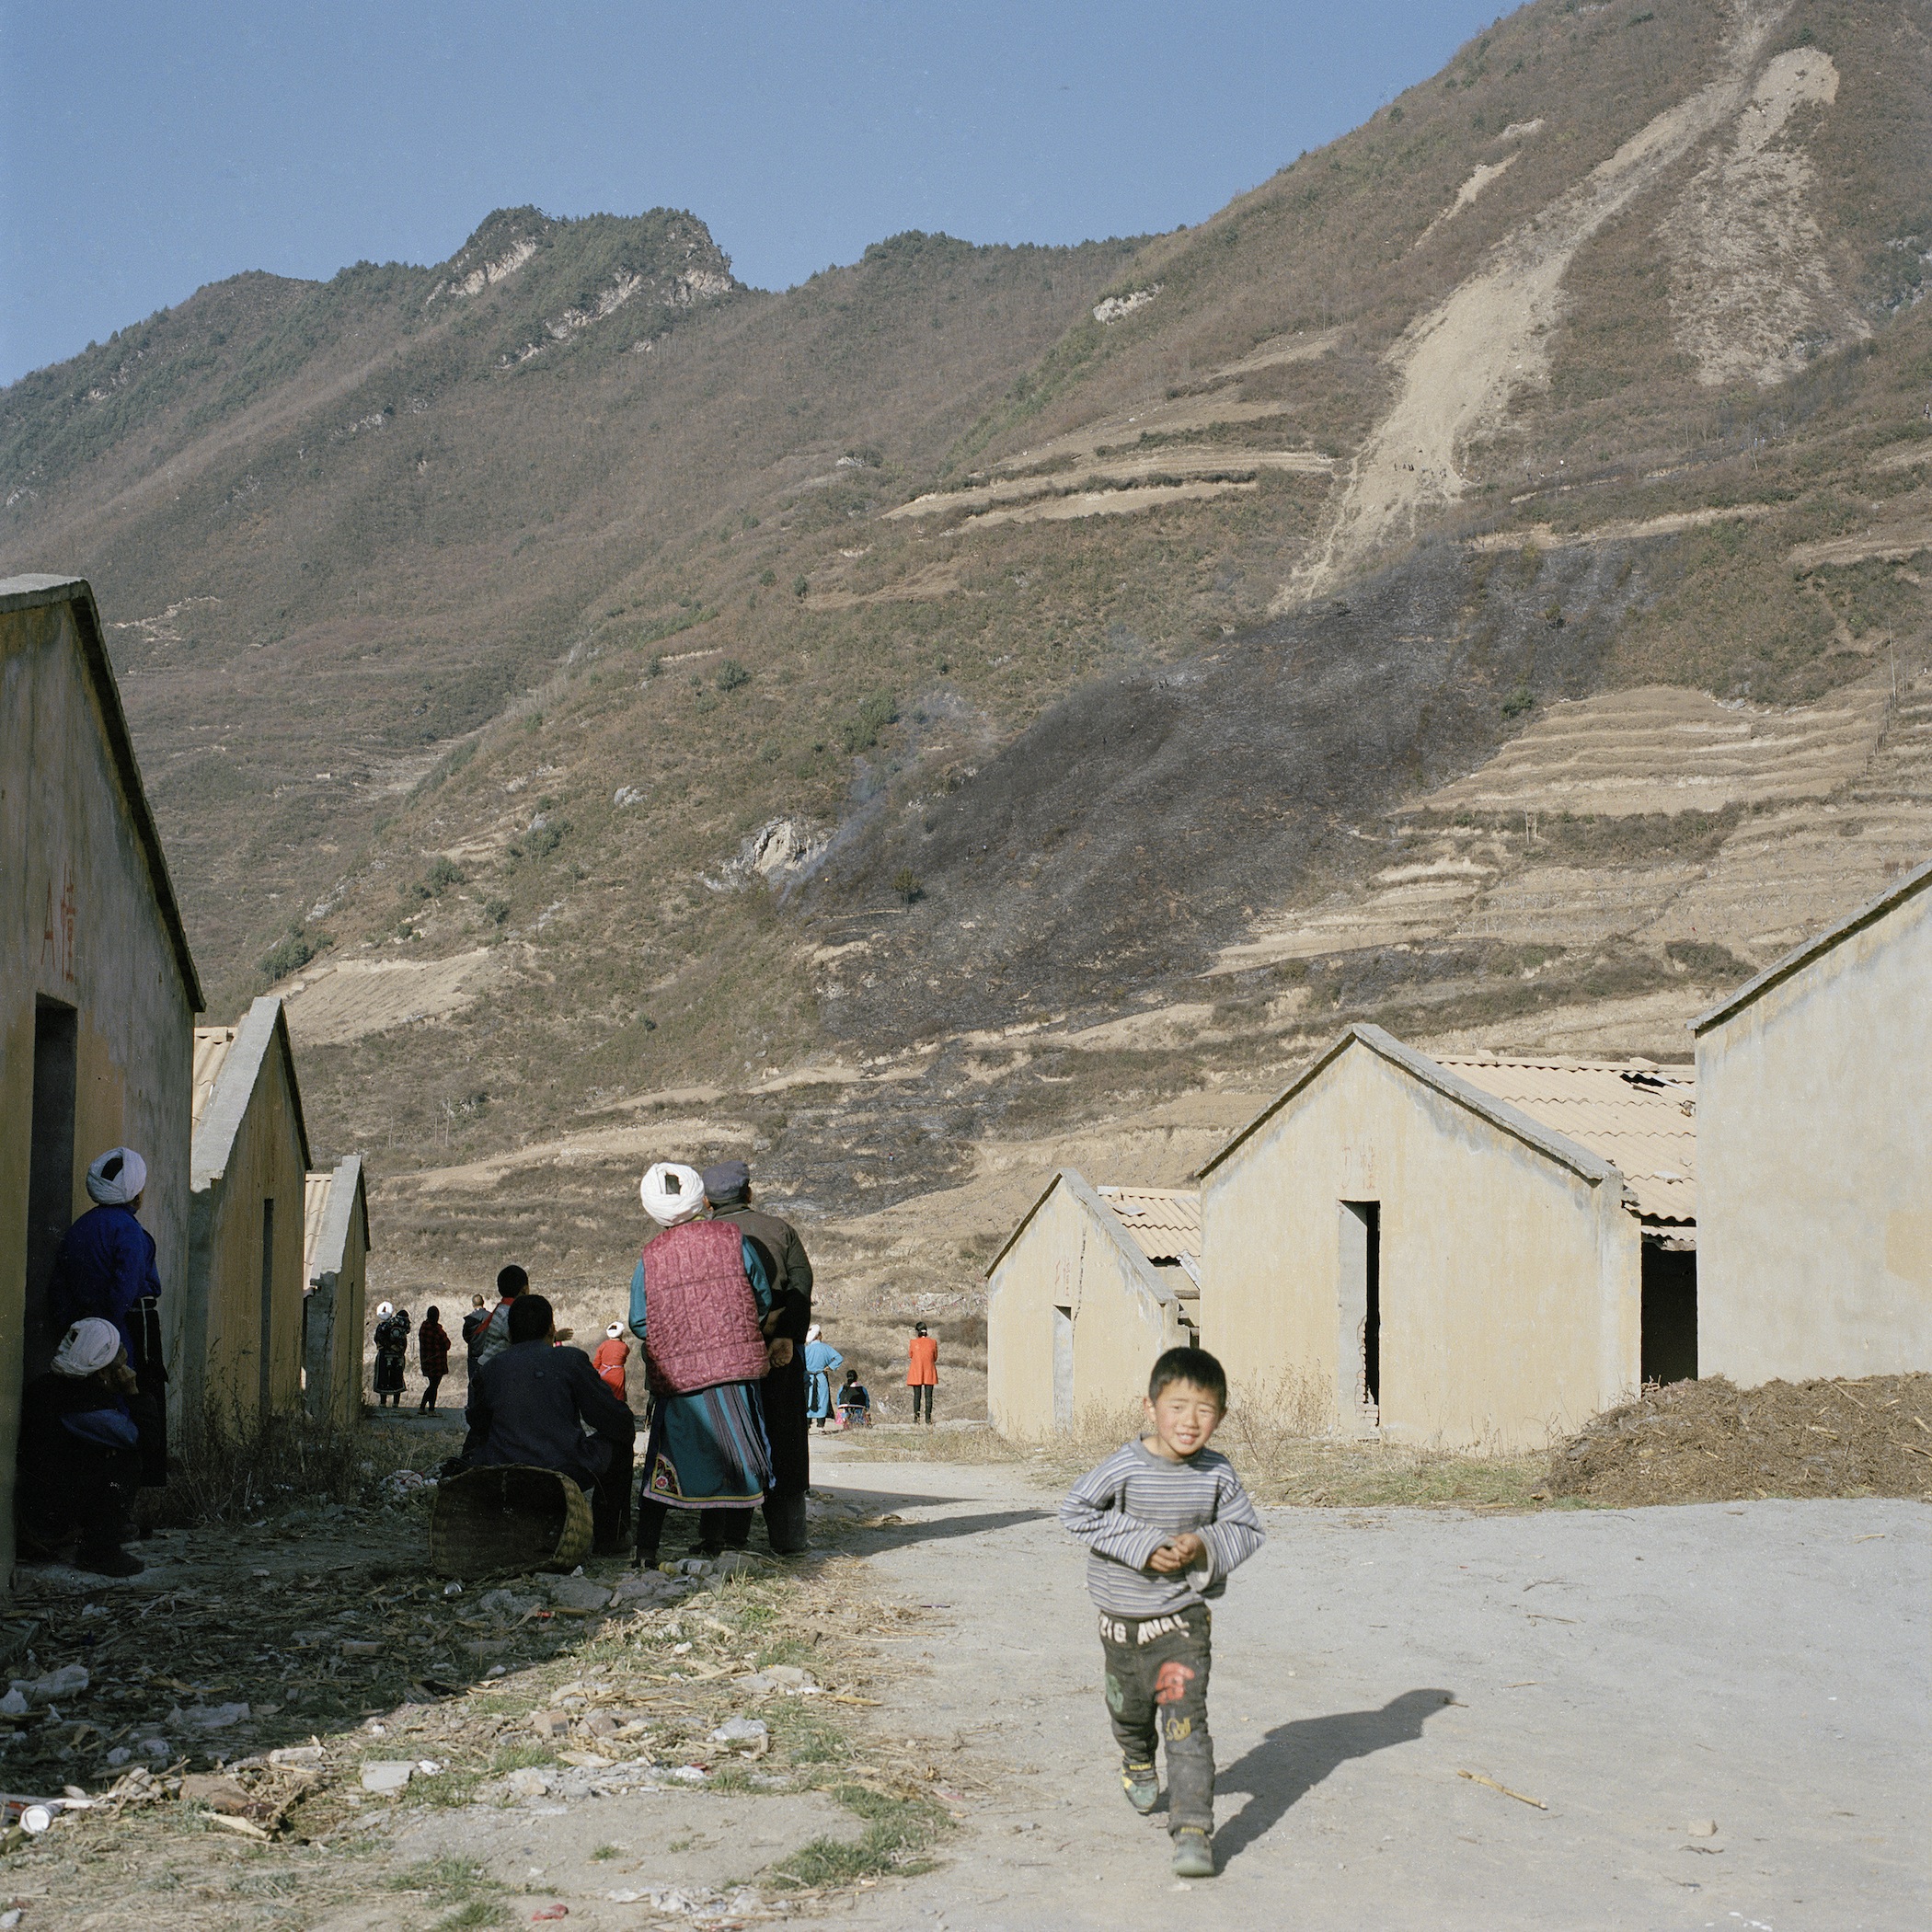 Out of Control Burning of Wild Grass, Radish Village, Sichuan, China, March 2016